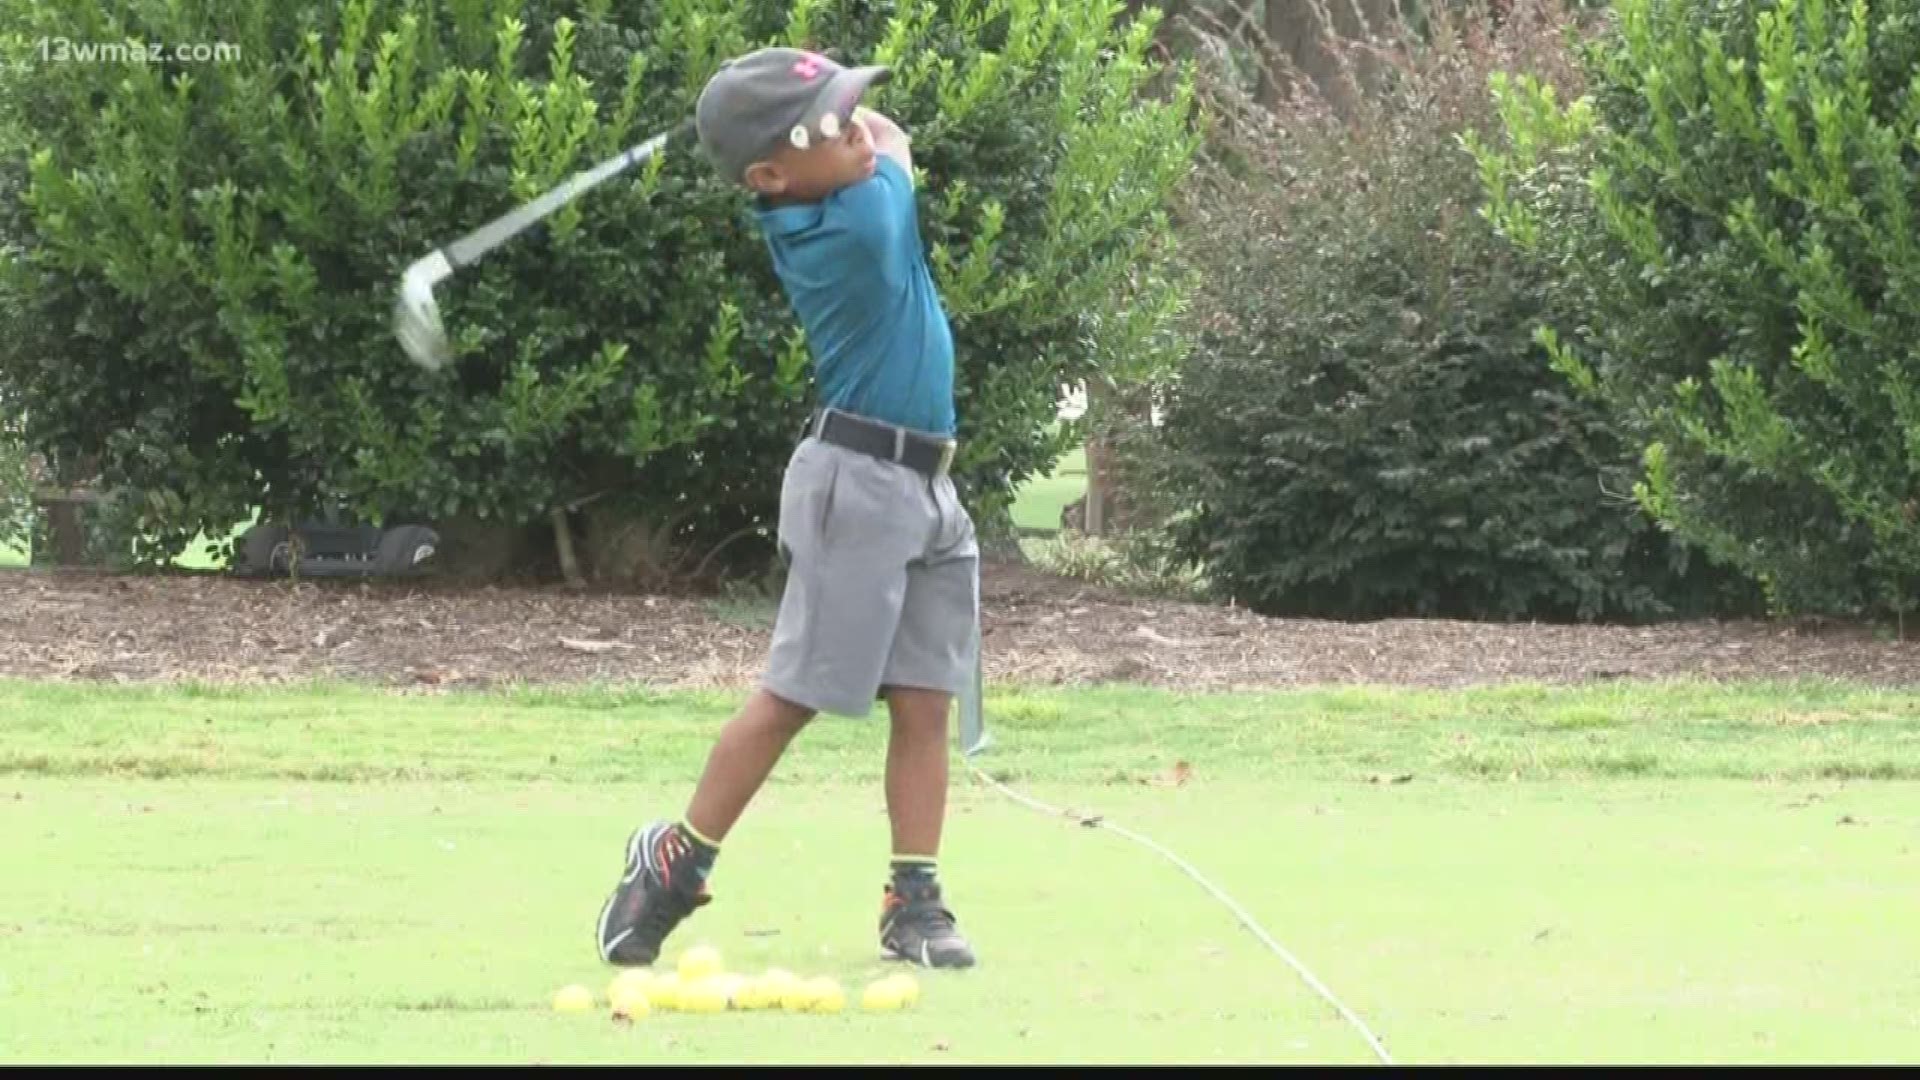 Warner Robins native Camden Guyton took on some of the world's best young golfers earlier this month as one of the youngest competitors.